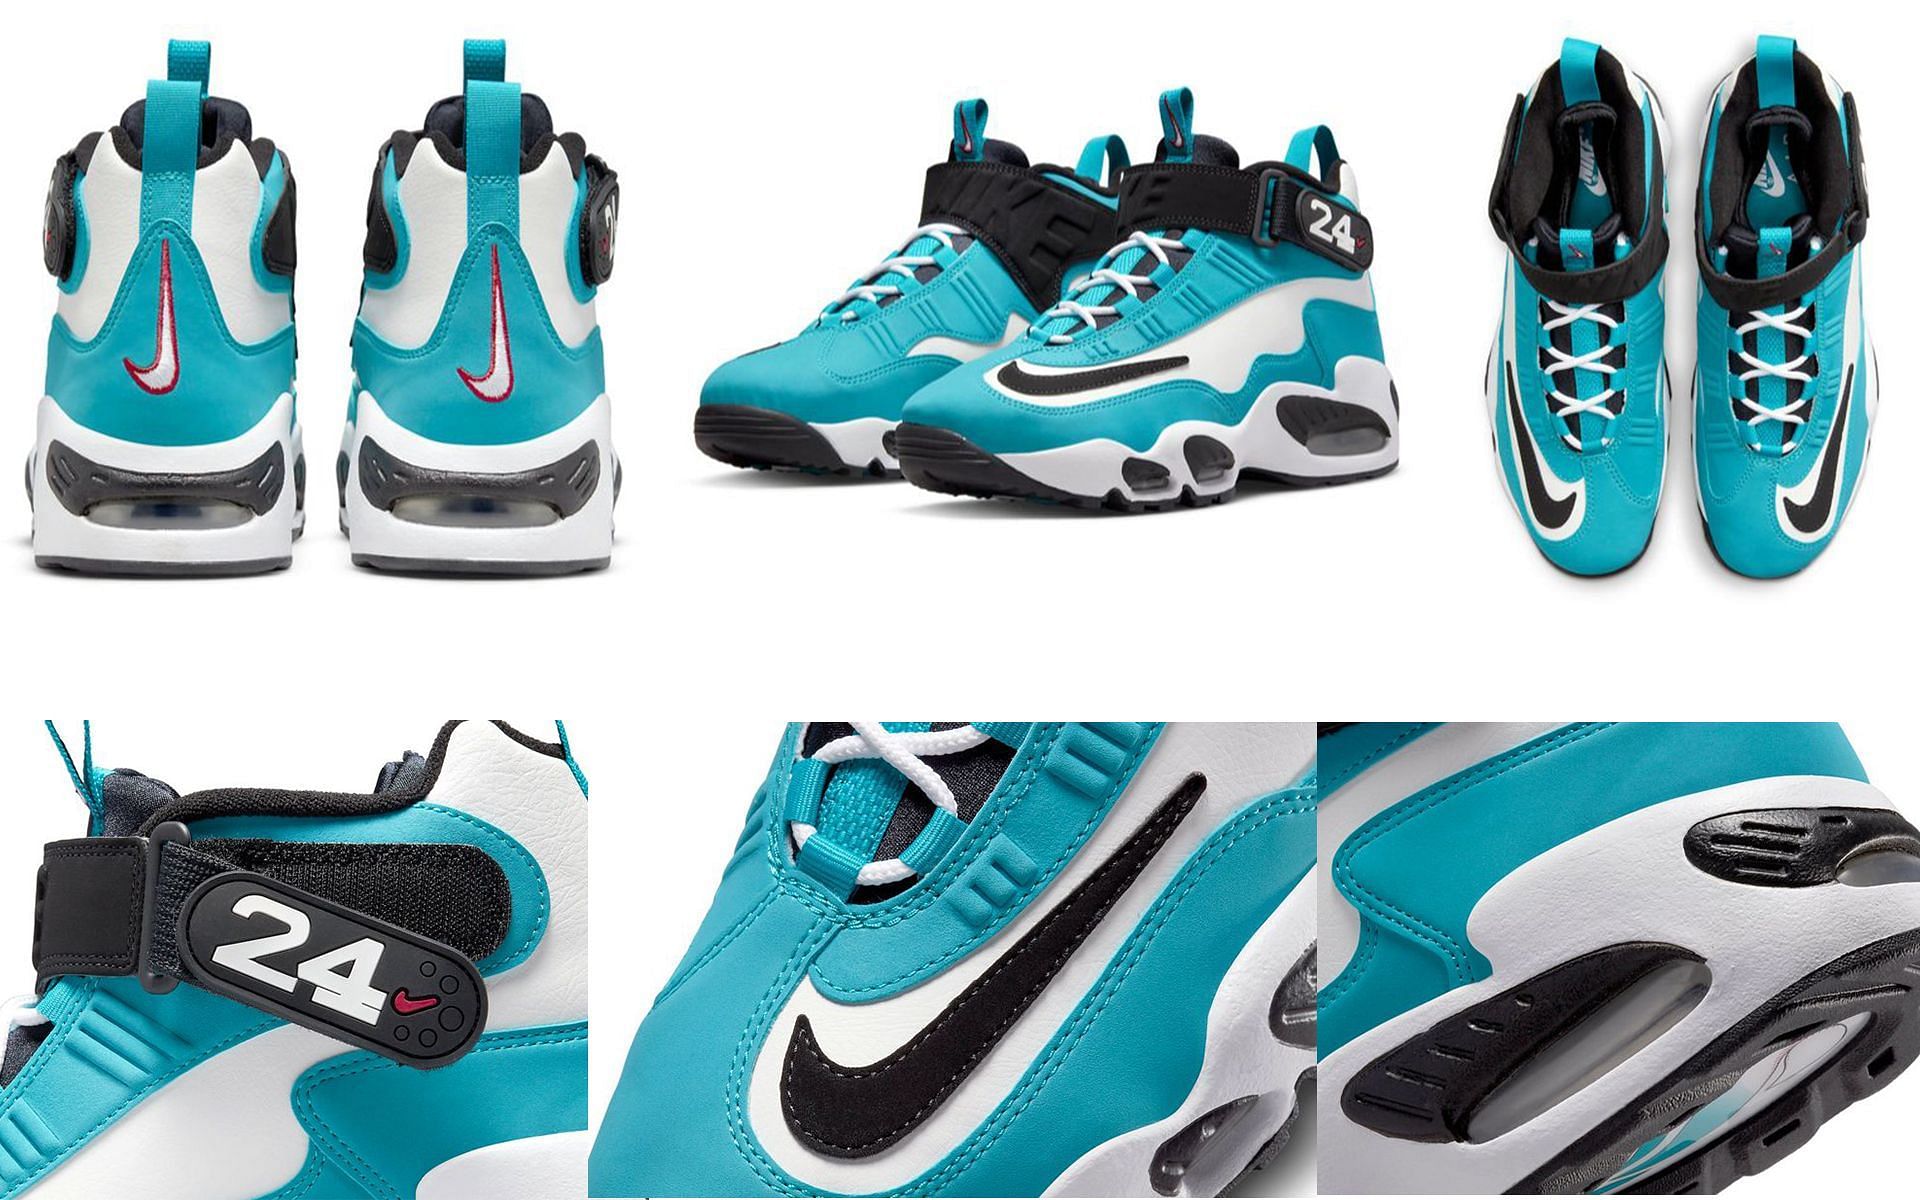 Nike is ready for the launch of Air Griffey Max 1 in Aqua colorway (Image via Sportskeeda)